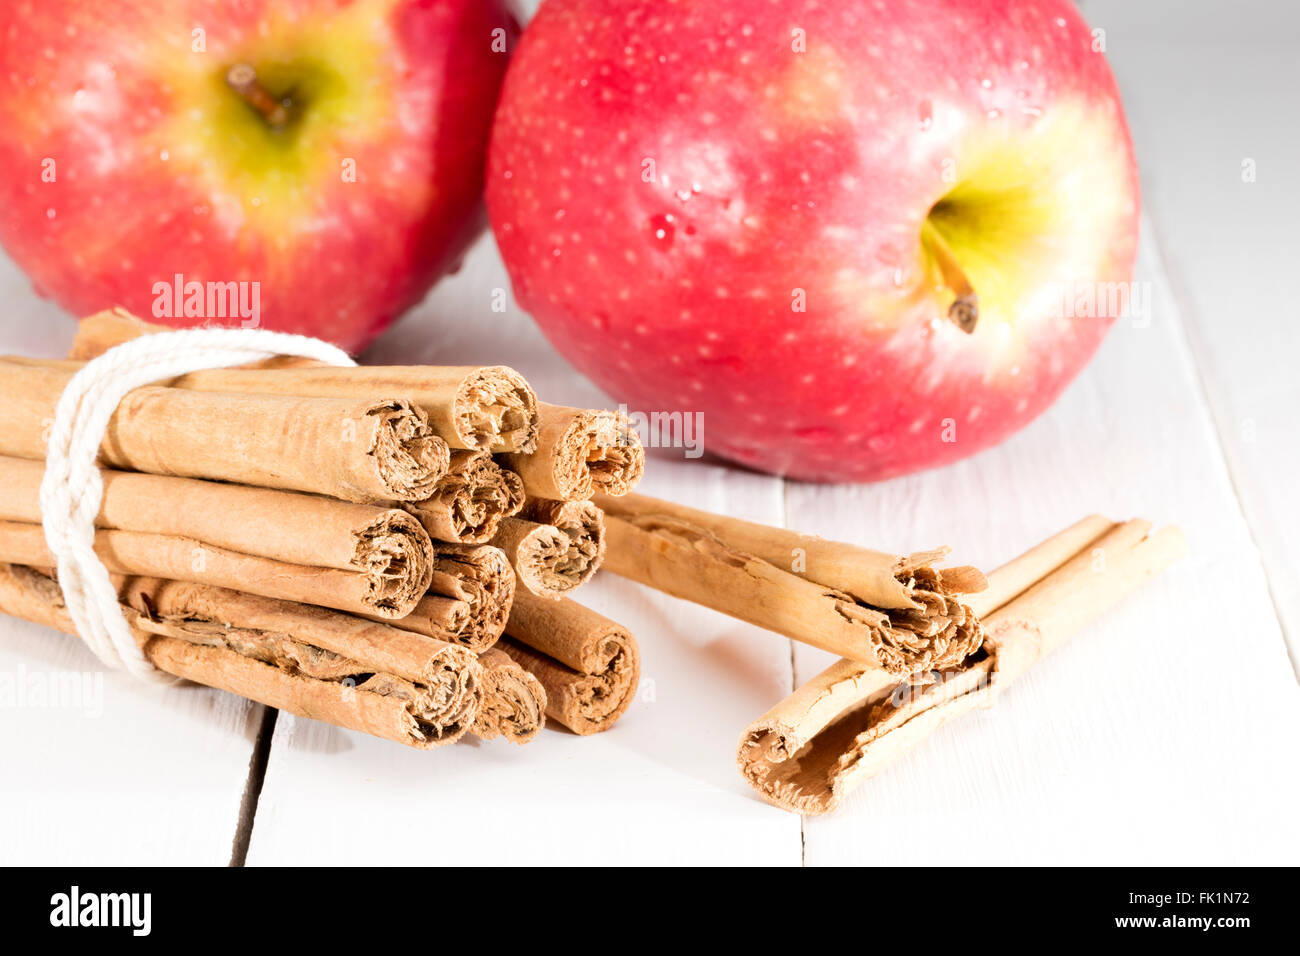 cinnamon sticks with apple on kitchen table ready for cooking a recipe Stock Photo